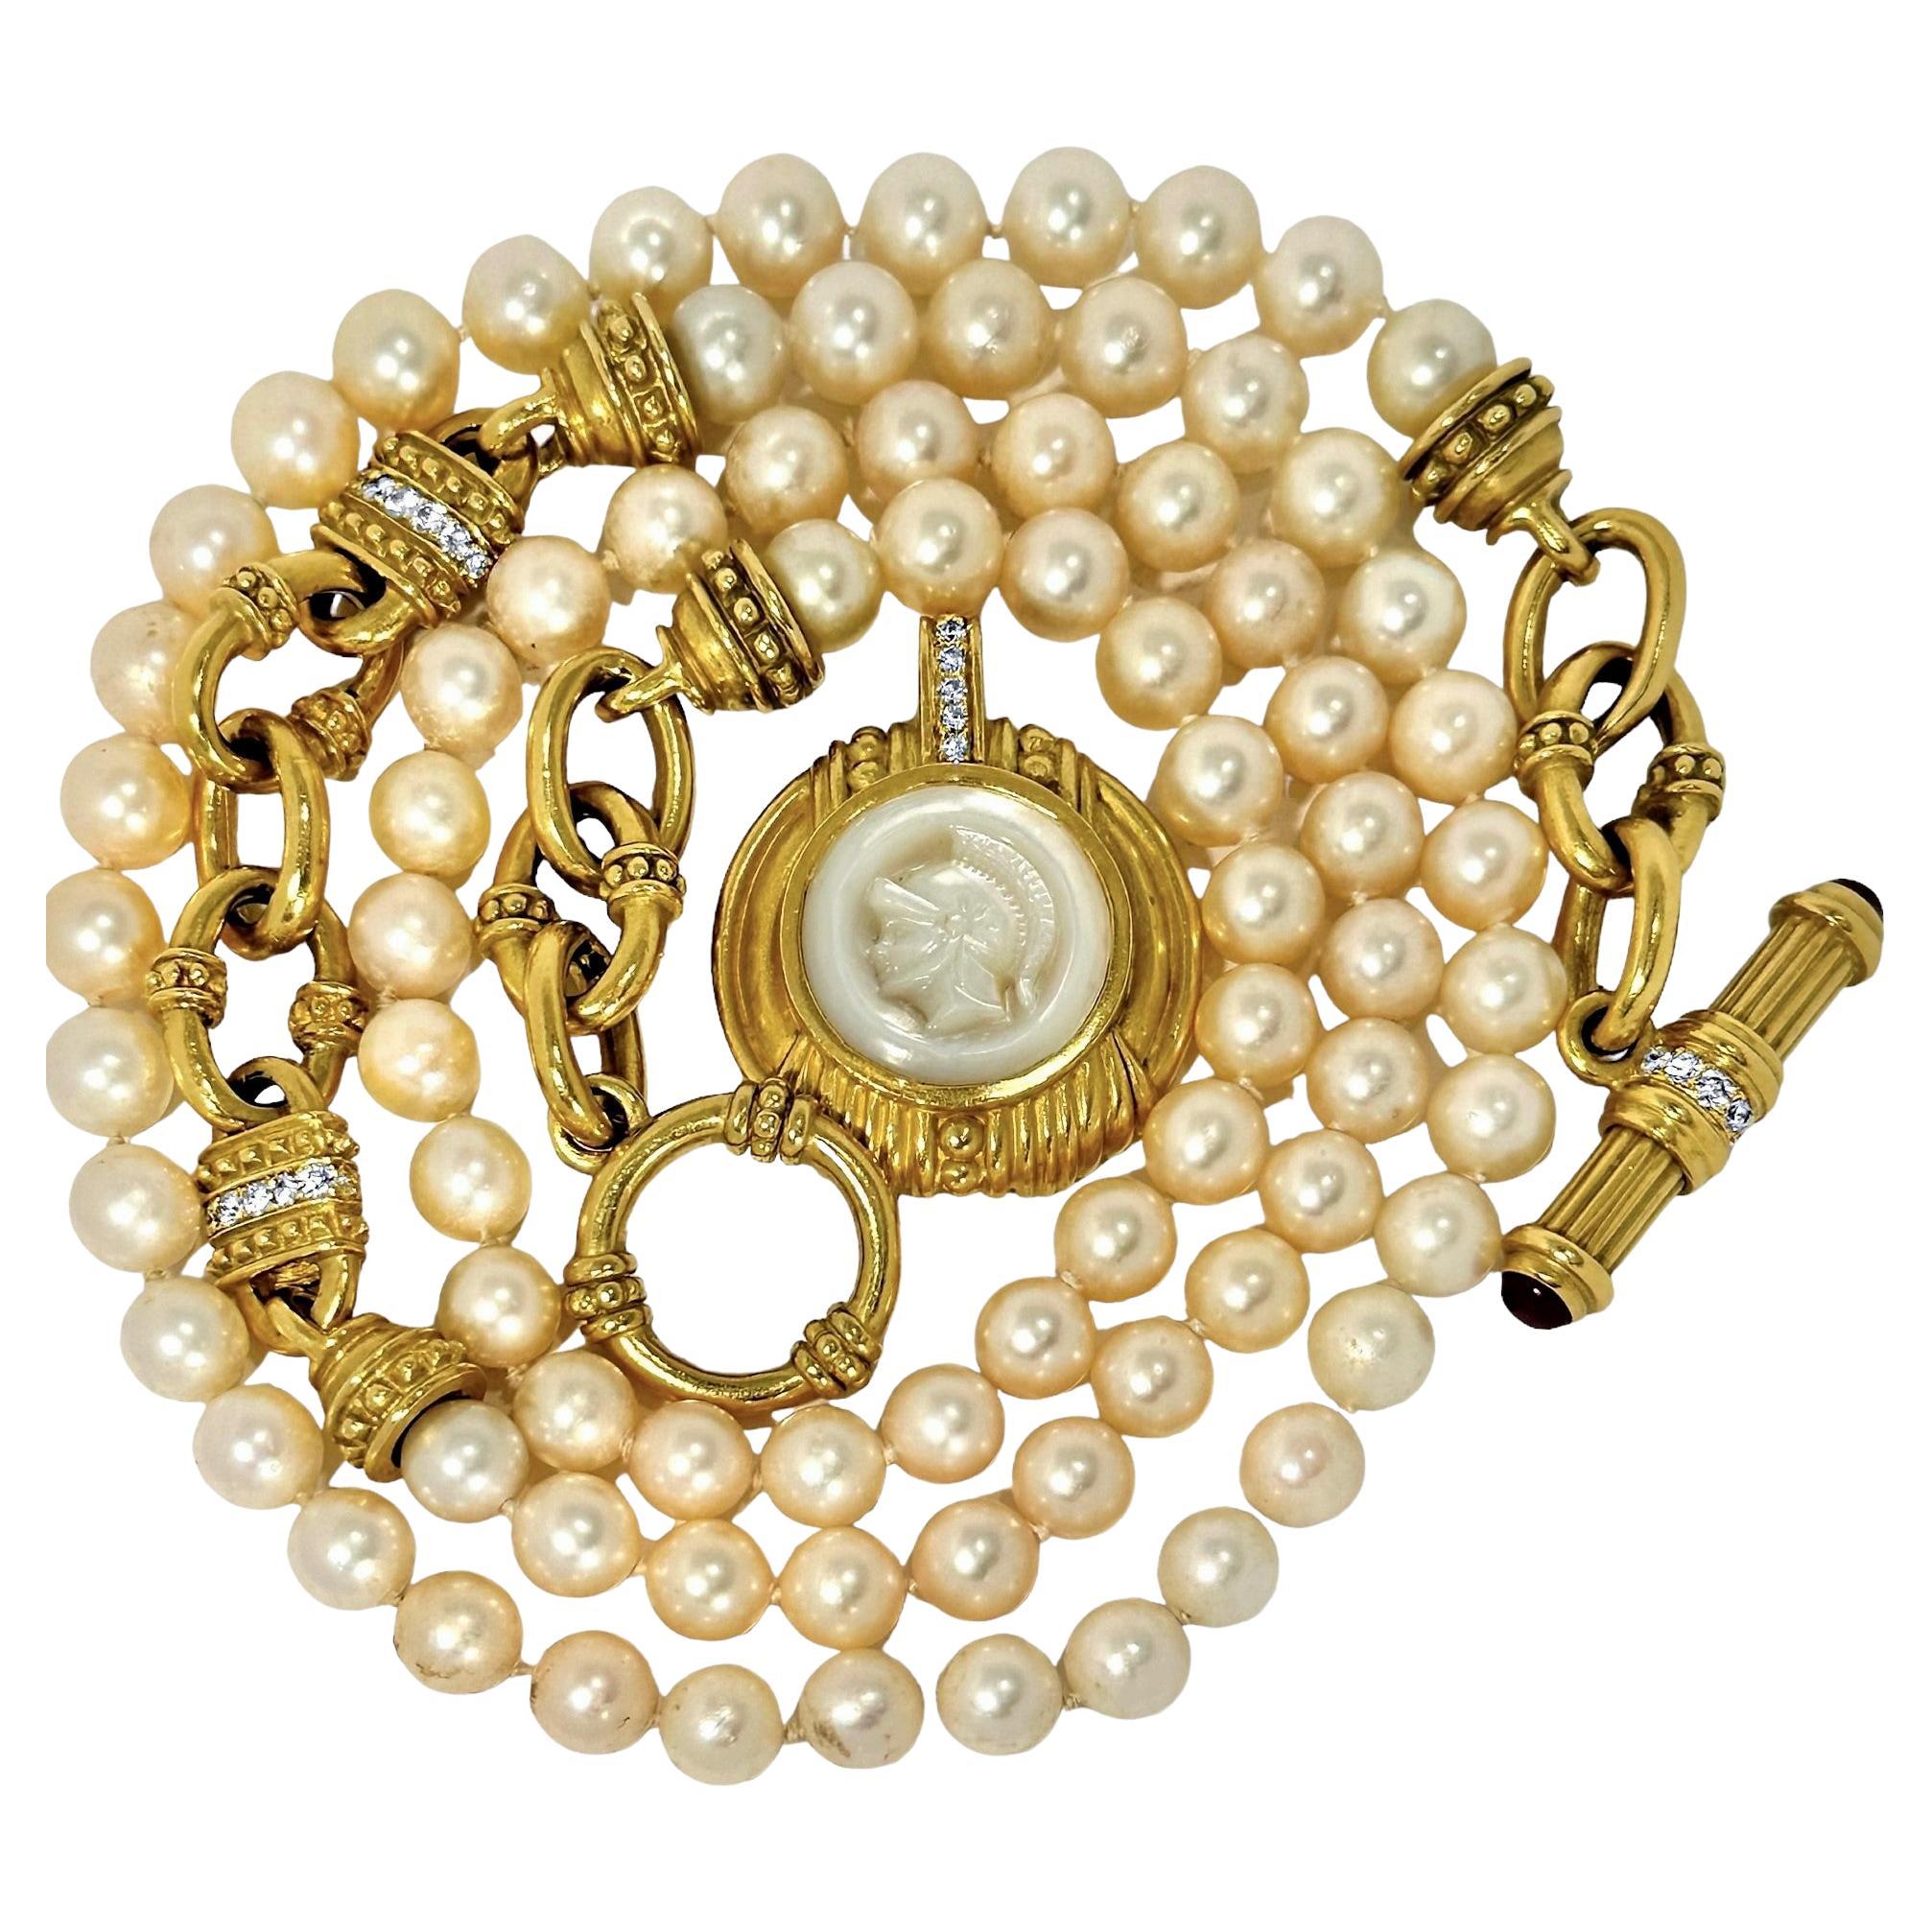 This wonderful, substantial and exquisitely detailed 18k yellow gold necklace from the esteemed designer, Judith Ripka, can best be described as monumental. Crafted in 18k yellow gold, it has at it's center a large Mother-of-Pearl cameo in the